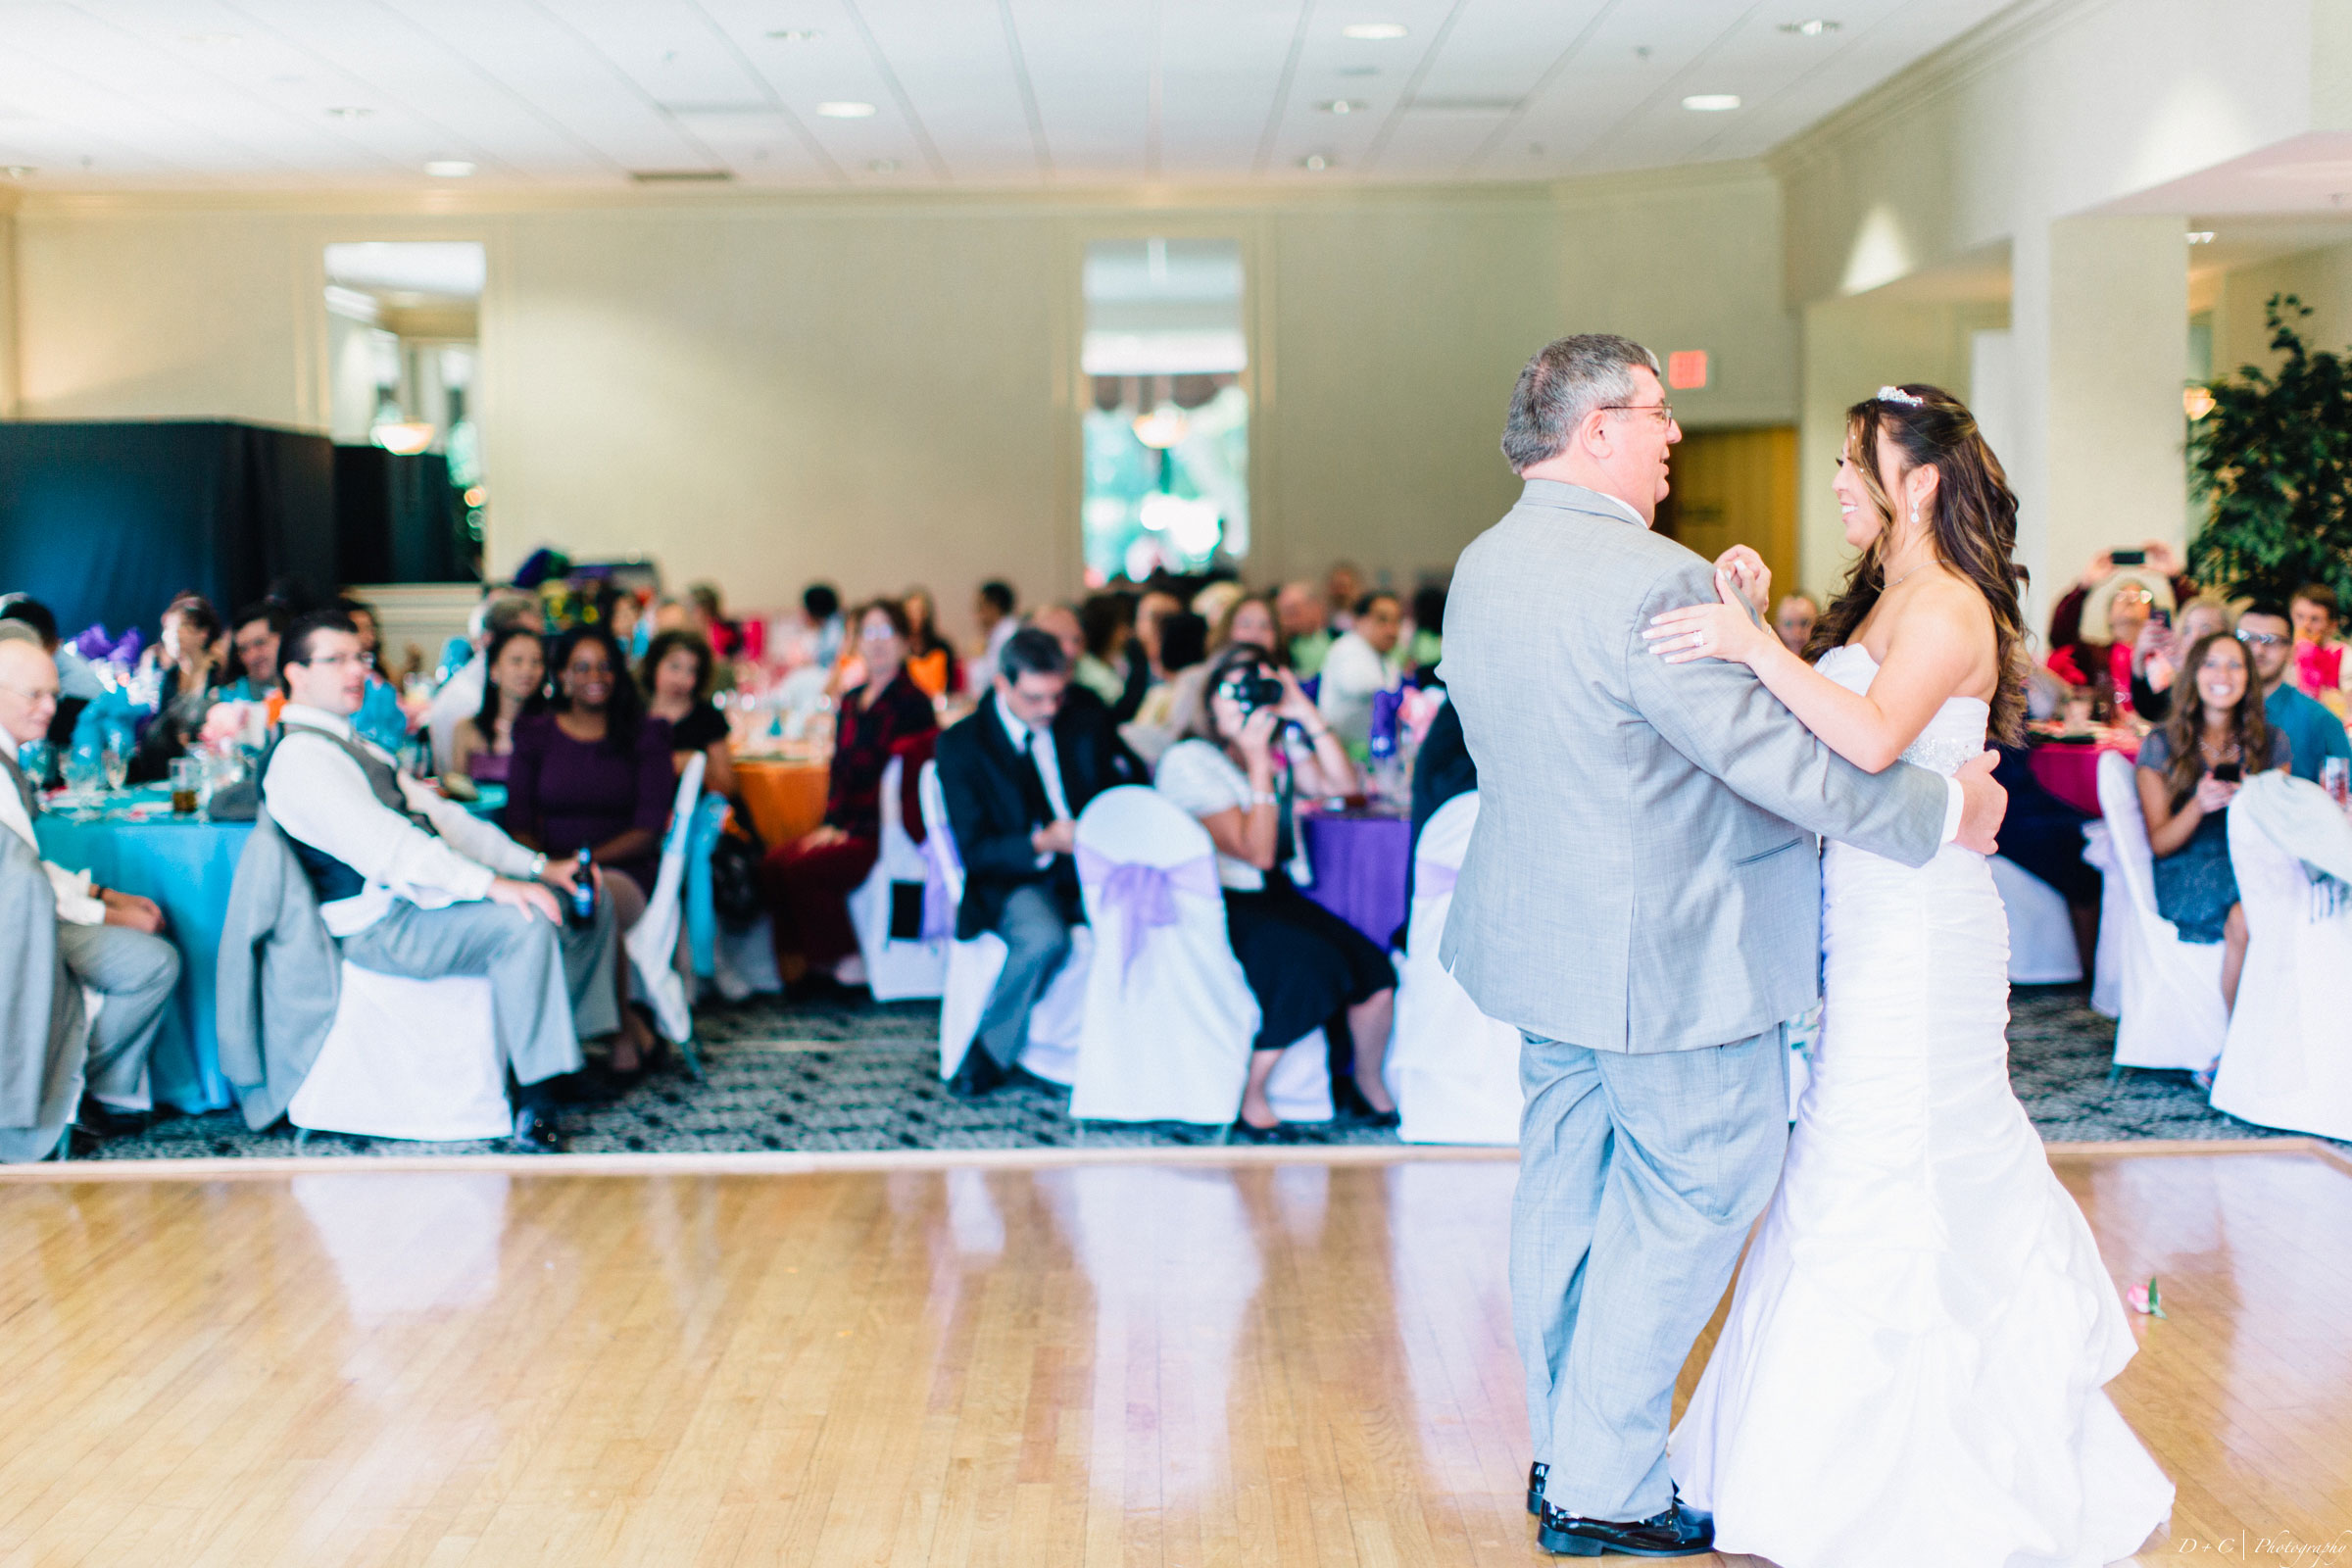 Susan + Andrew | Norbeck Country Club Wedding